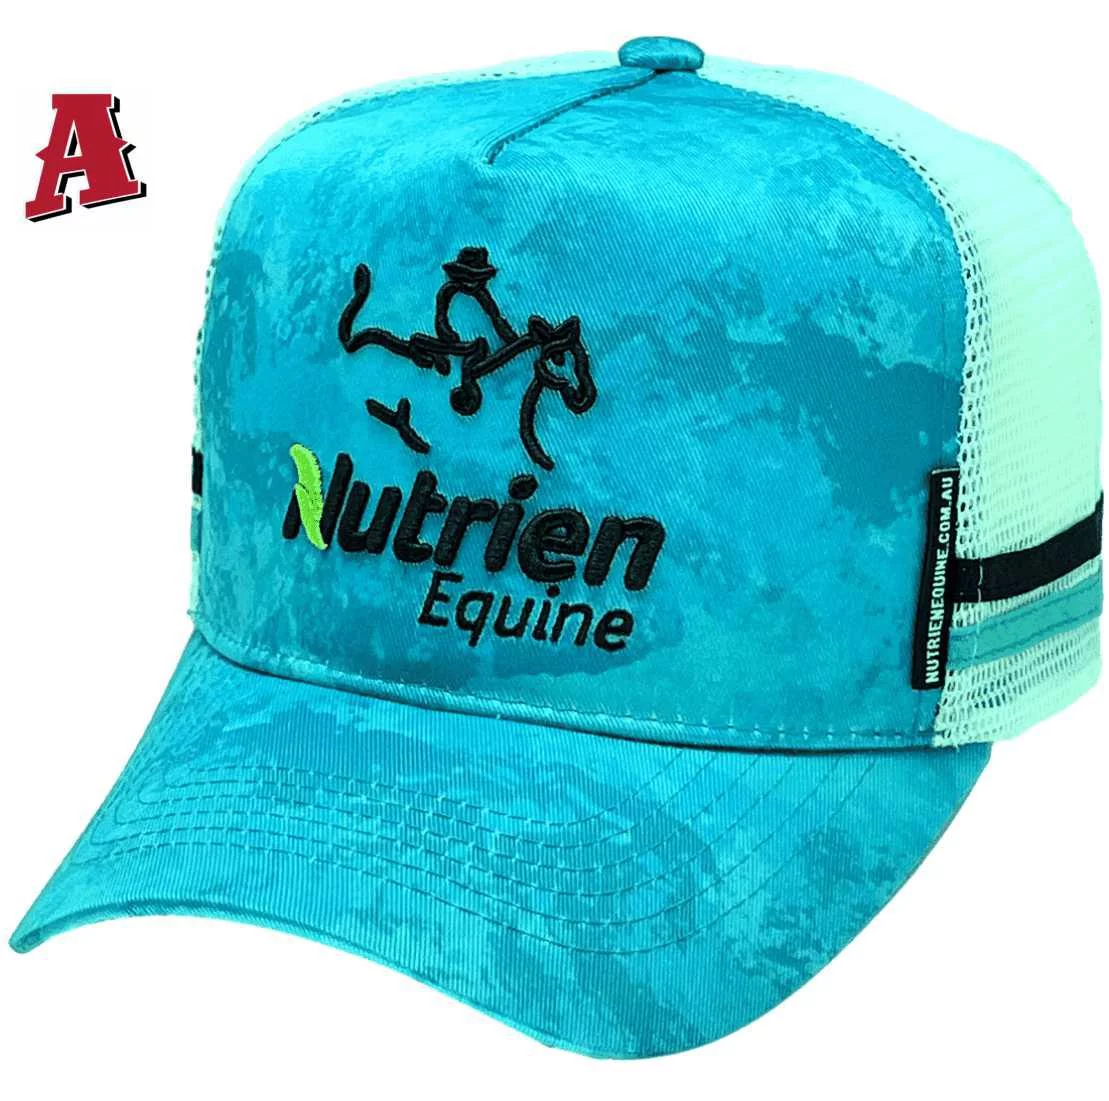 Nutrien Equine Classic Tamworth NSW HP Midrange Aussie Trucker Hats with 2 Side Bands and Australian Head Fit Crown Substrate Sky Camo